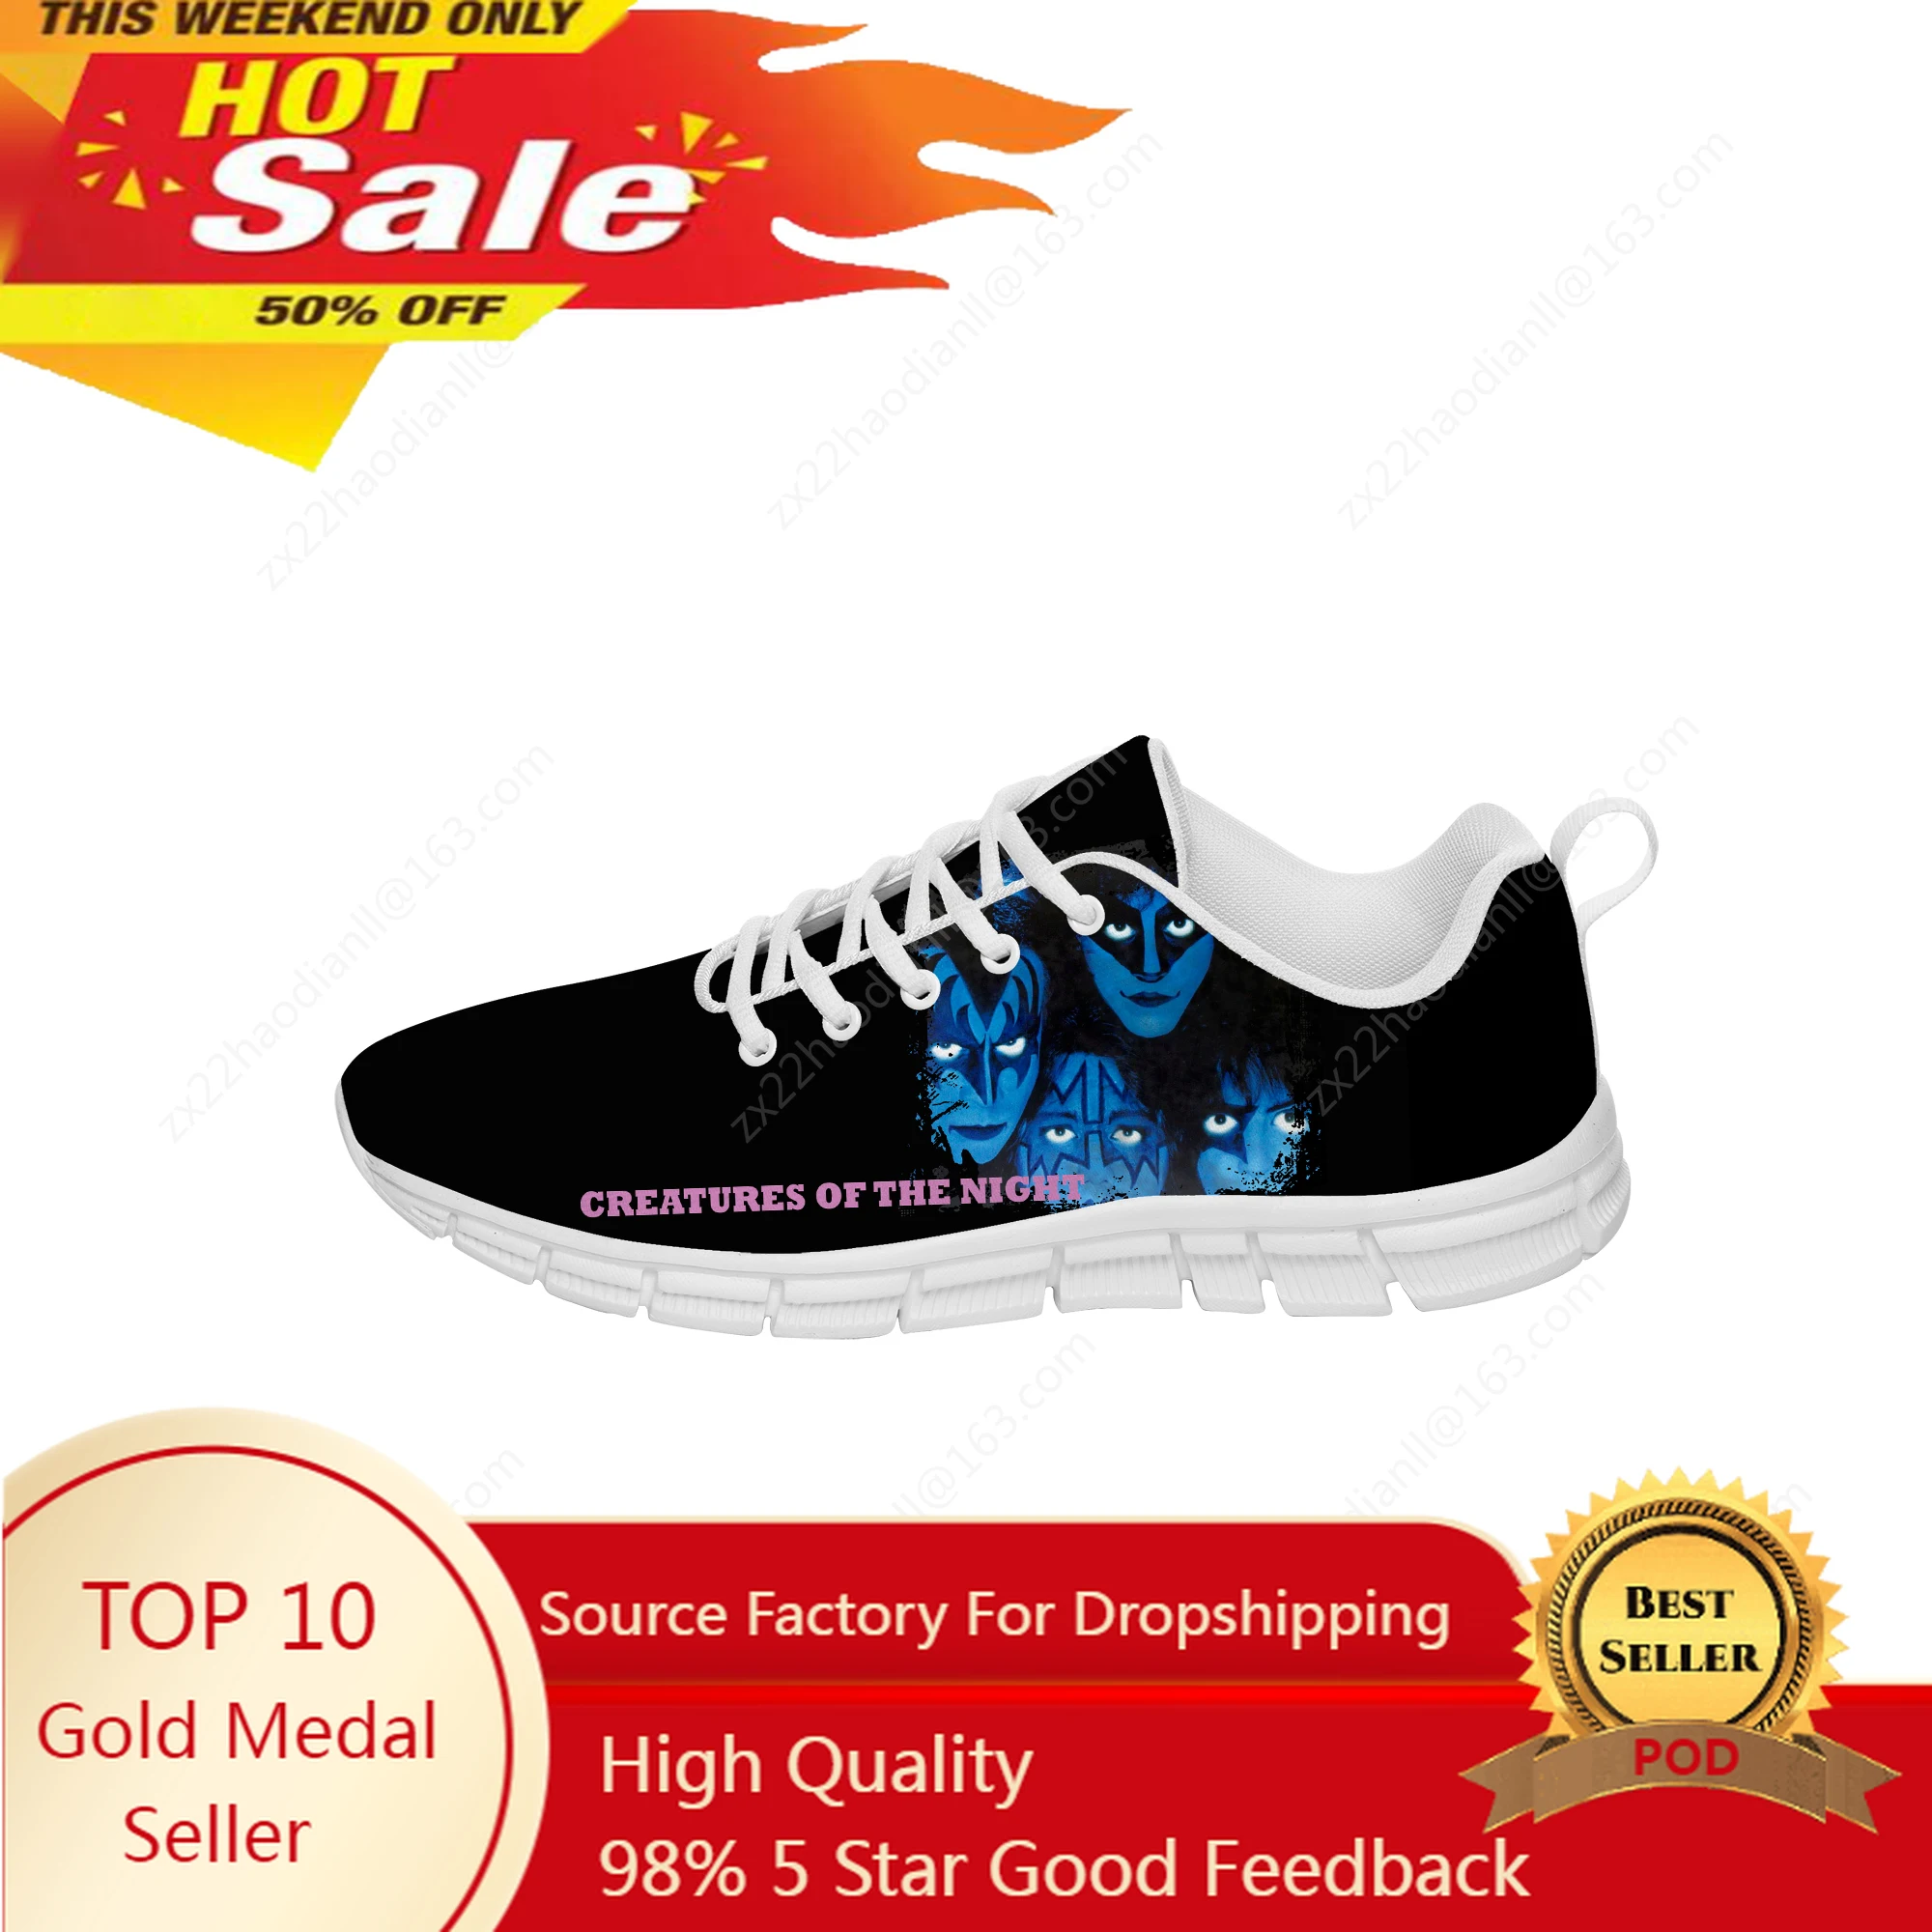 

Creatures of the Night Sneakers Mens Band Kiss Womens Teenager Casual Shoes Canvas Running 3D Shoes Breathable Lightweight shoe